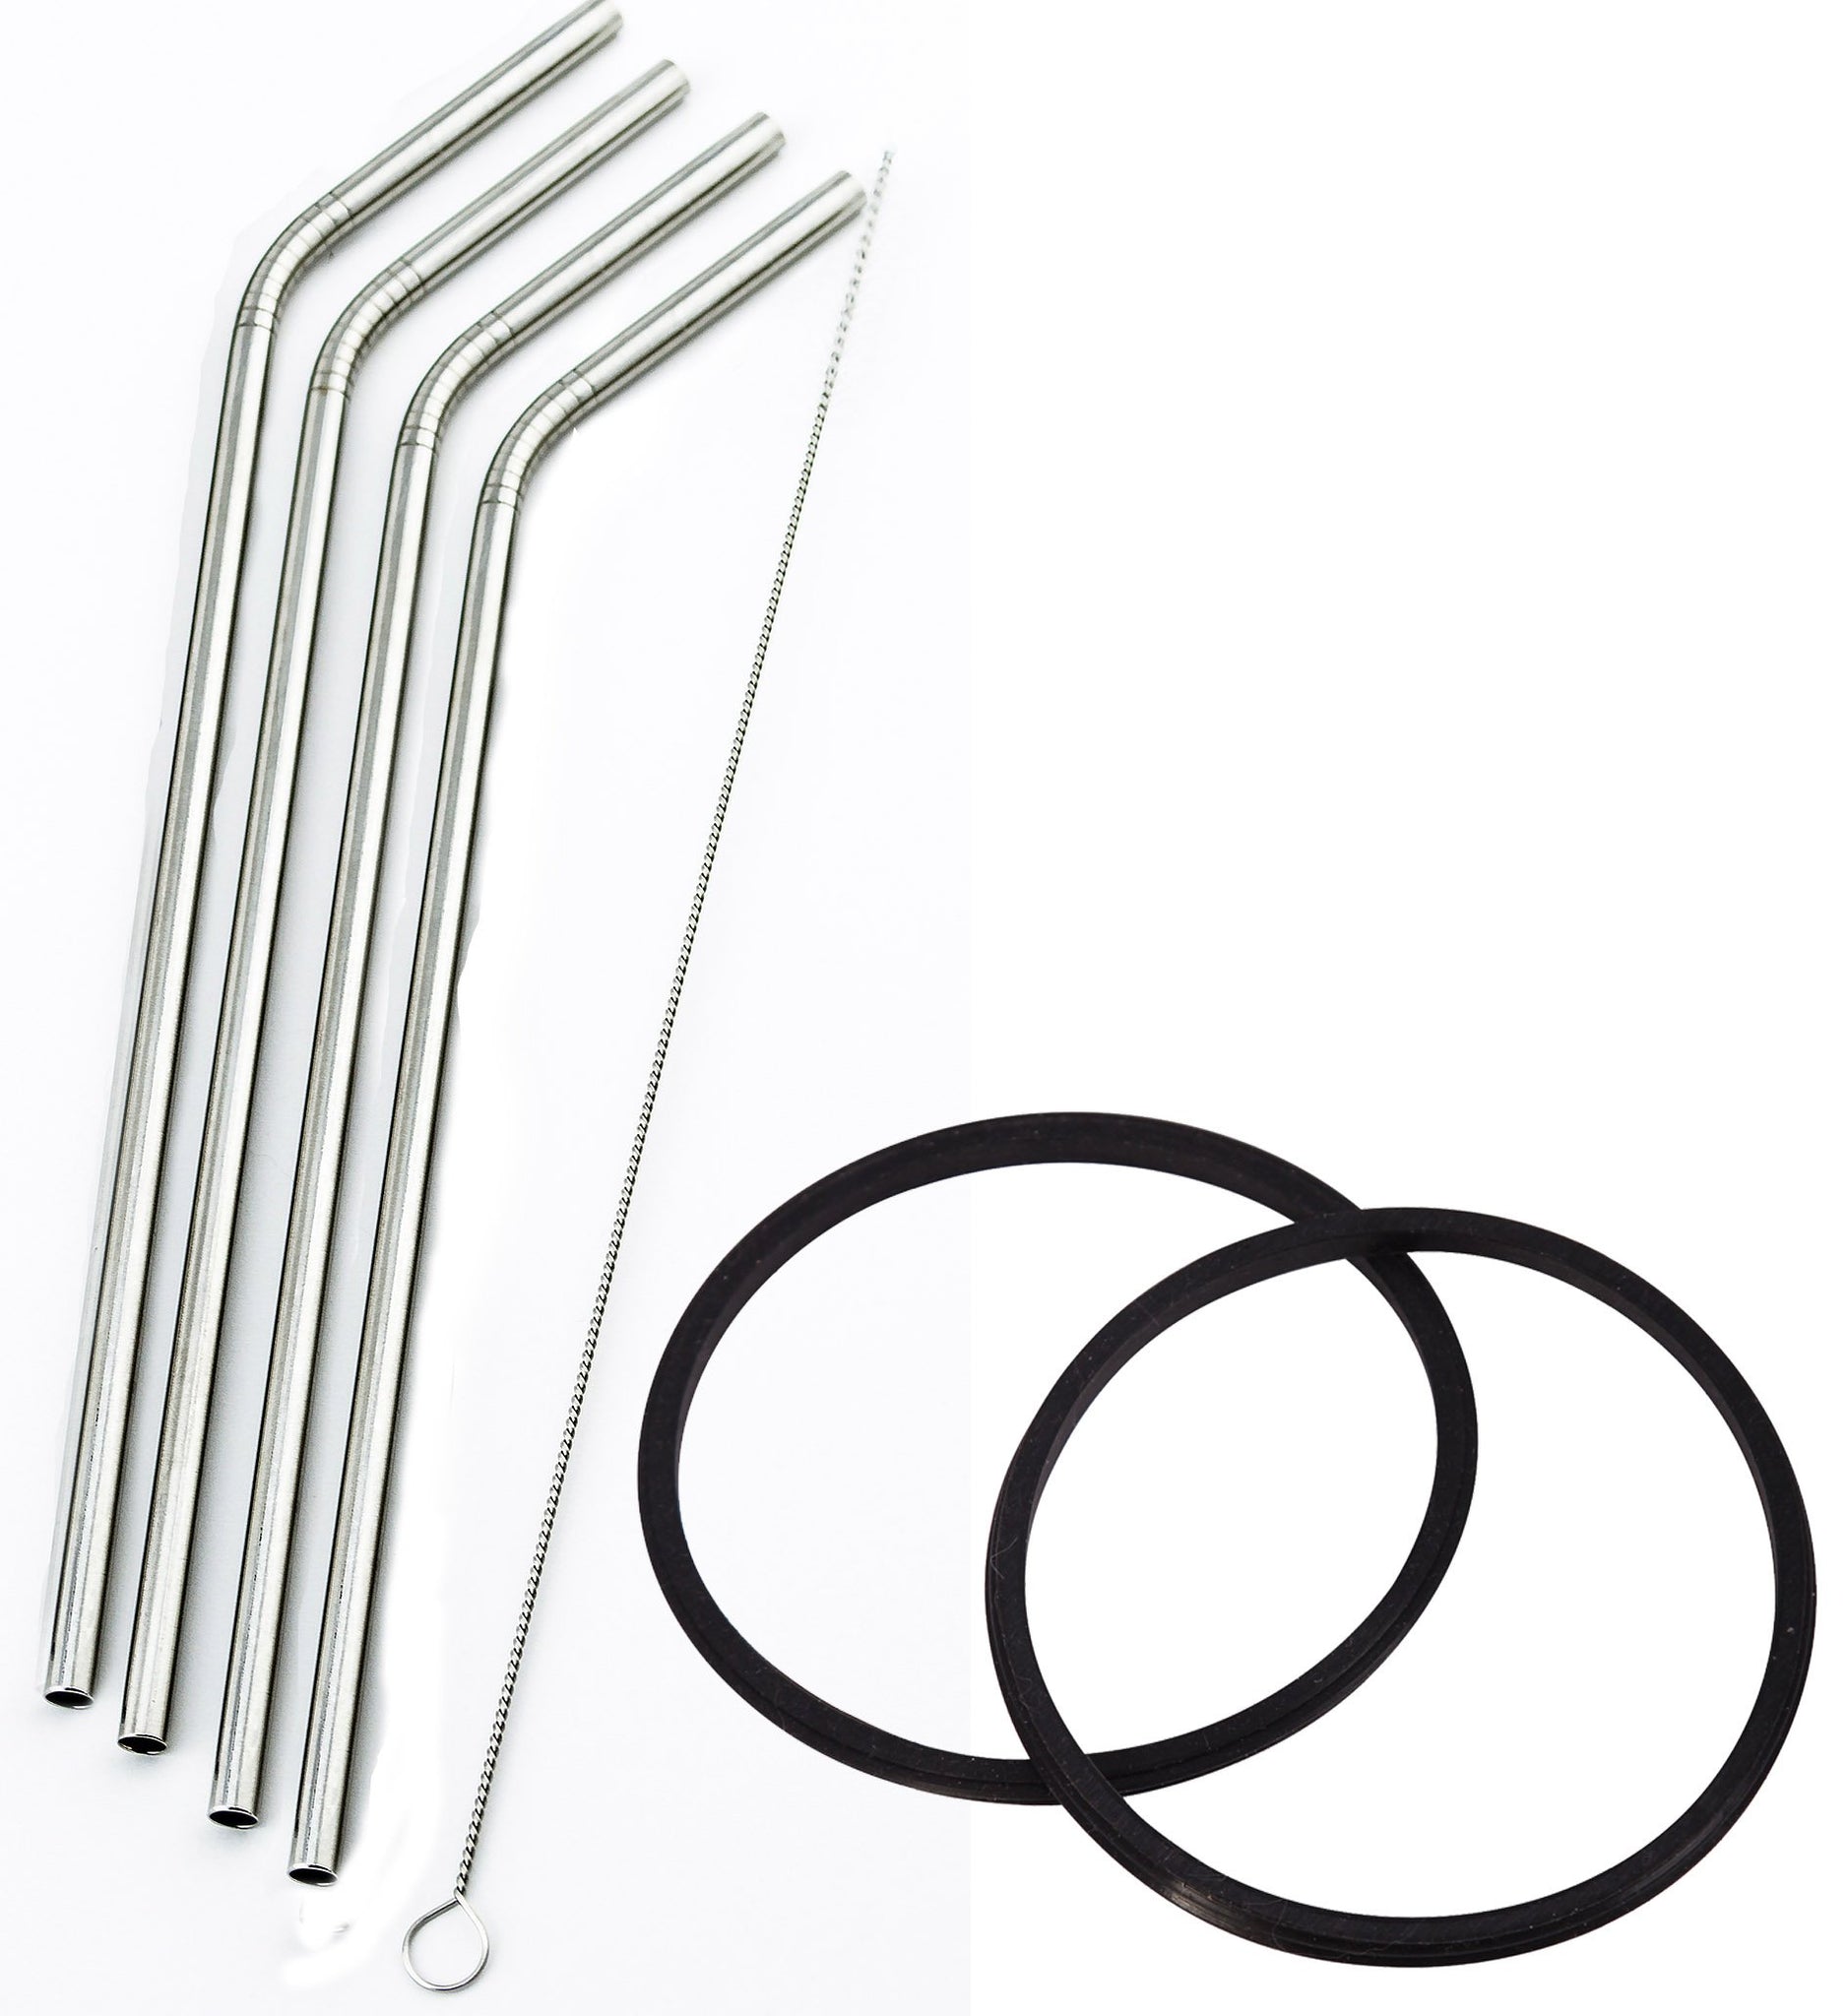 2 Pack Replacement Rubber Gasket Seal Ring 30 ounce oz Tumbler Vacuum Stainless Steel Cup Flex Spare O-Ring Top Lid CocoStraw Brand (2 Pack Gaskets 30oz + 4 Stainless Straws)